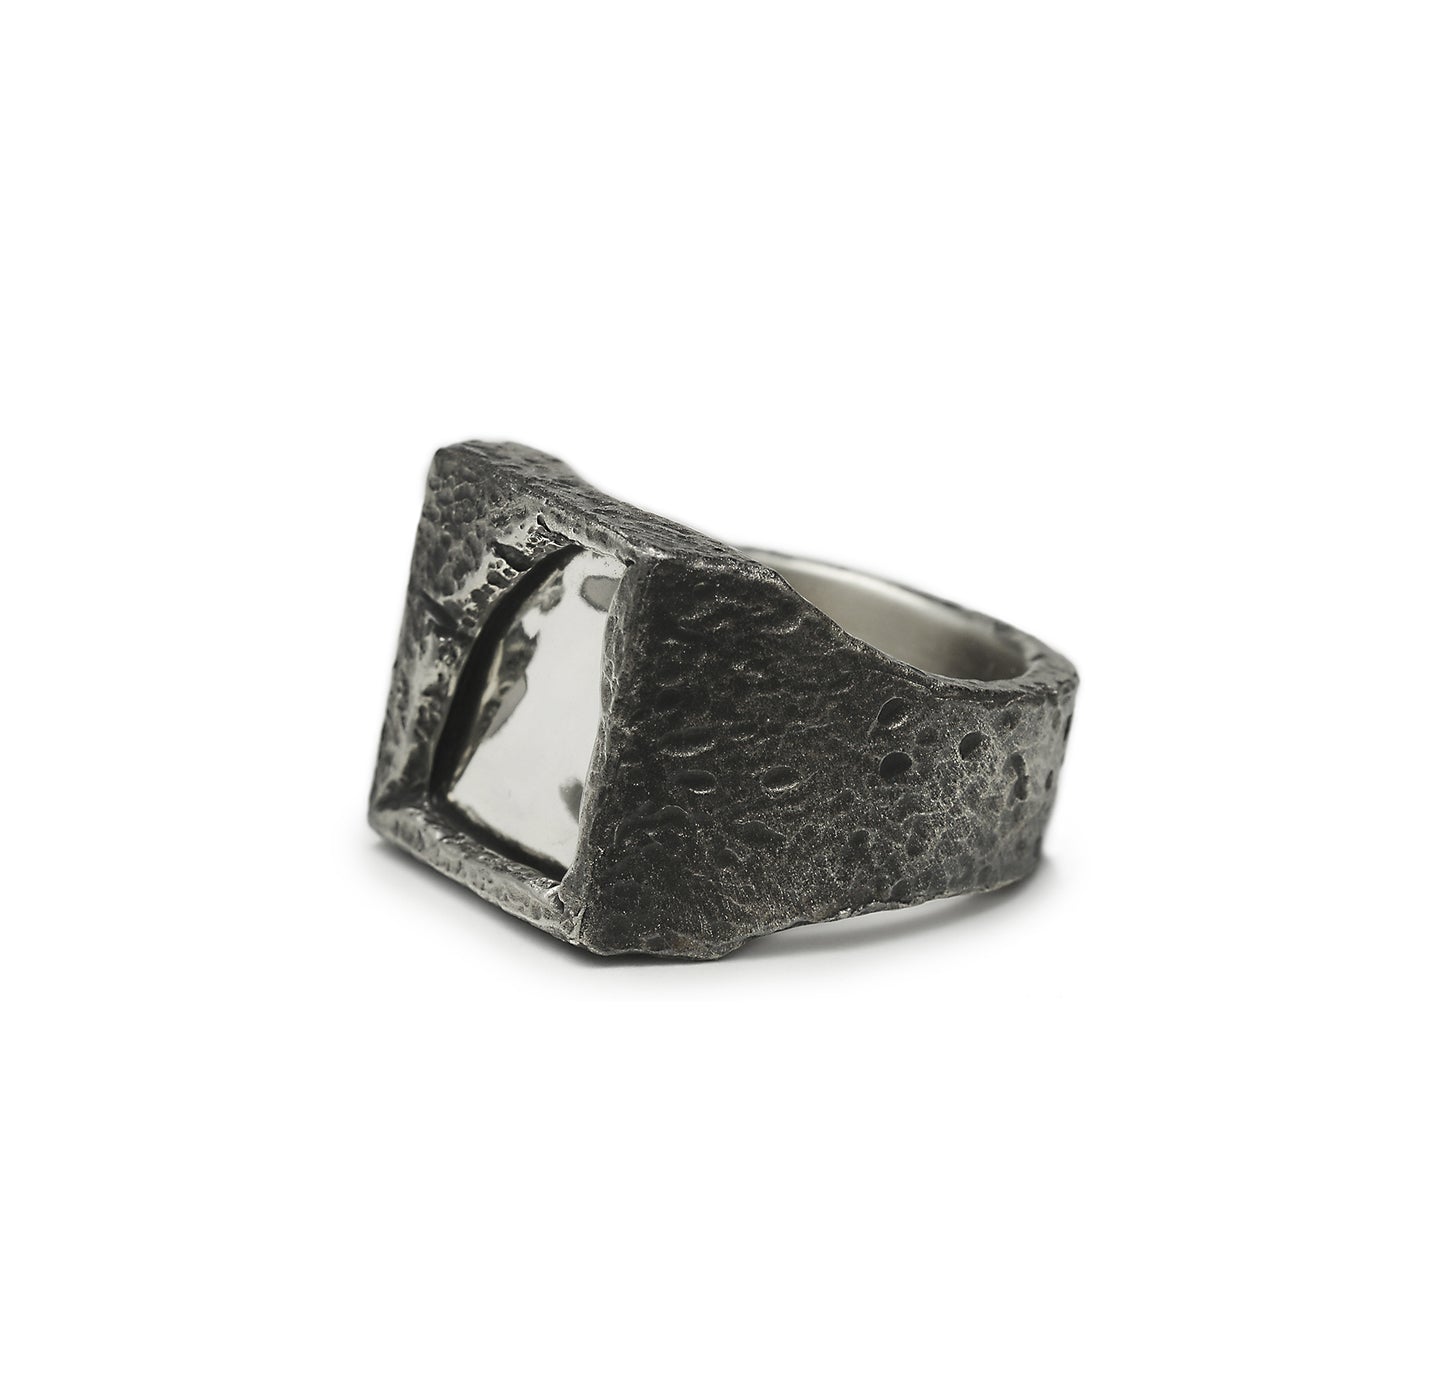 R-98 afterglow - Square sterling silver signet ring